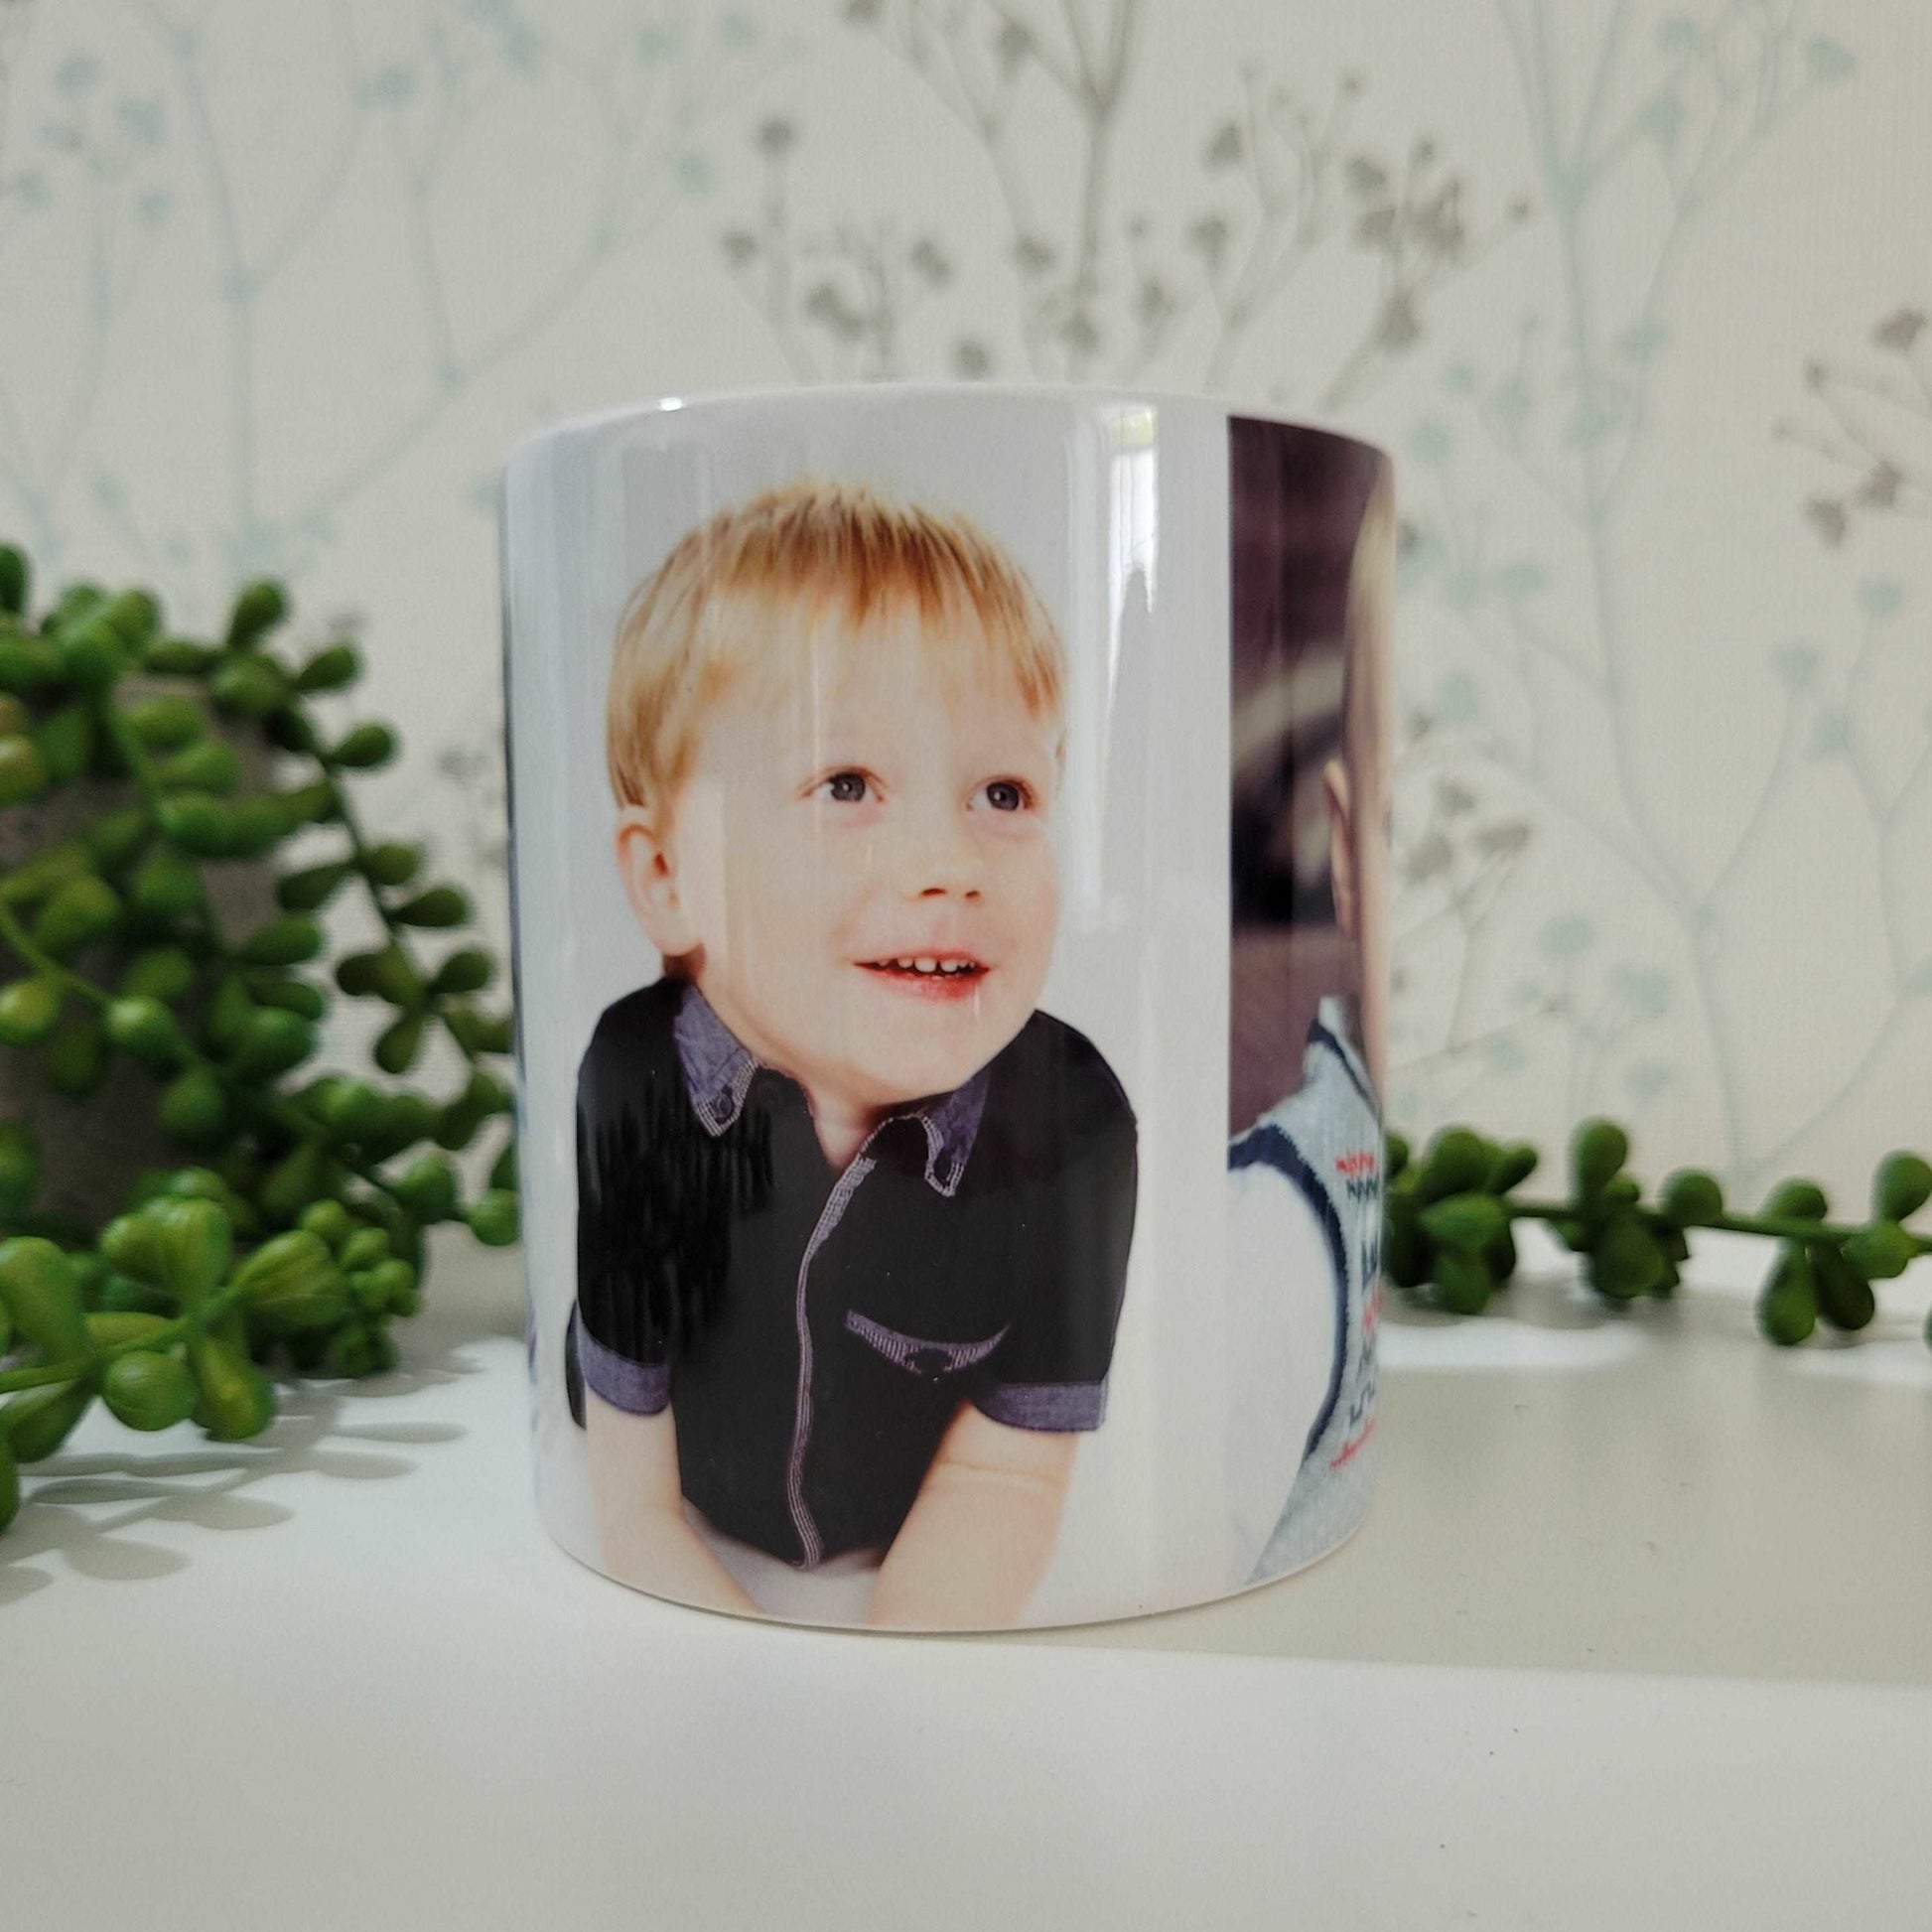 Personalised gifts - personalised photo mug - moose and goose gifts M&G